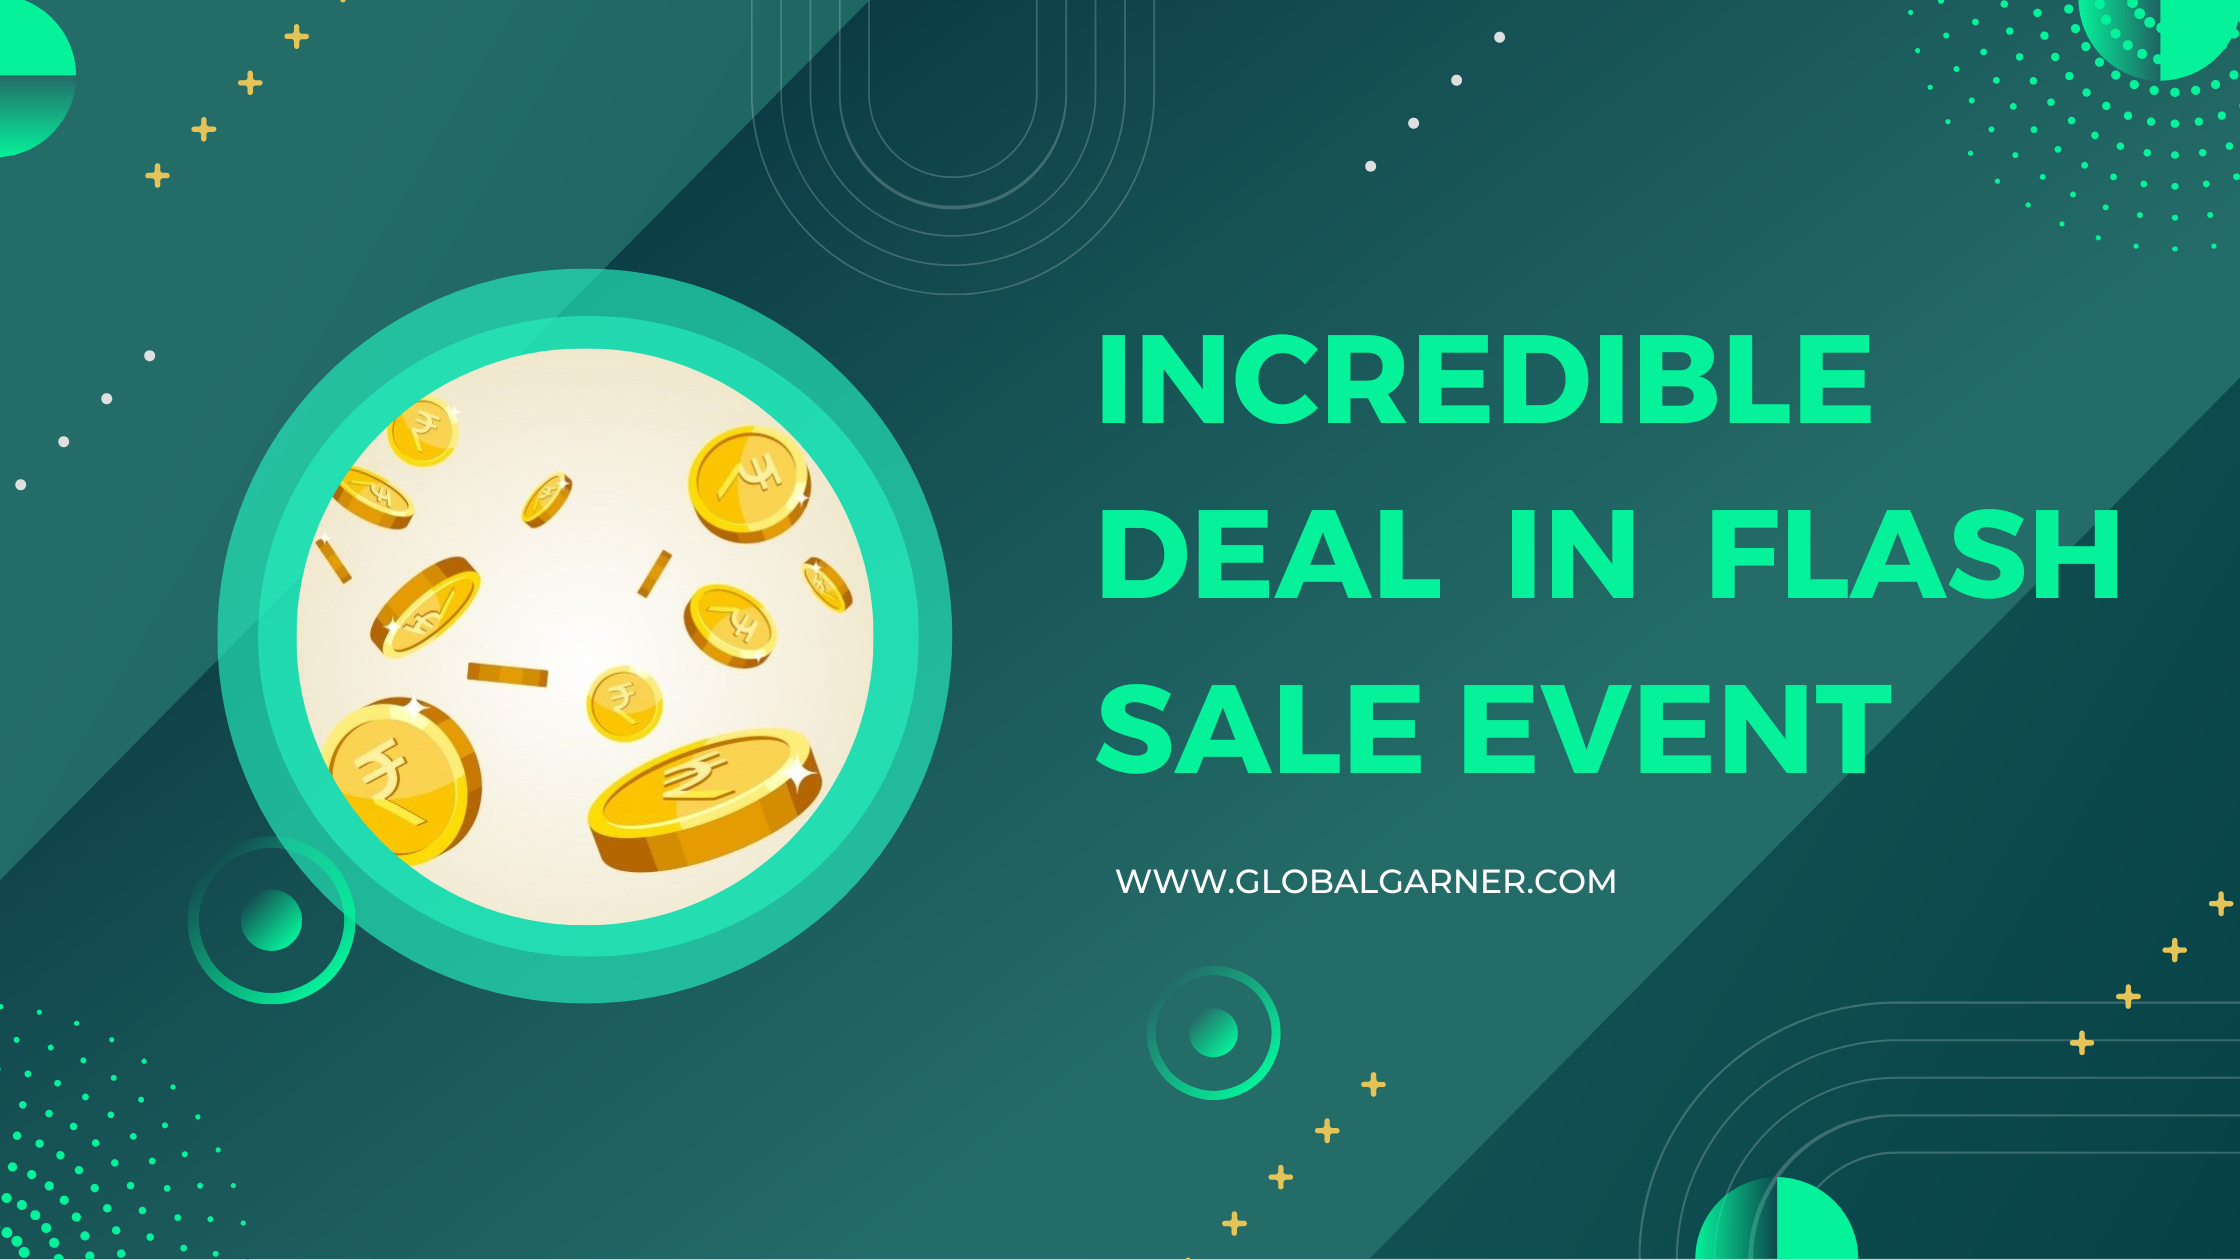 Incredible Deal in Flash Sale Event